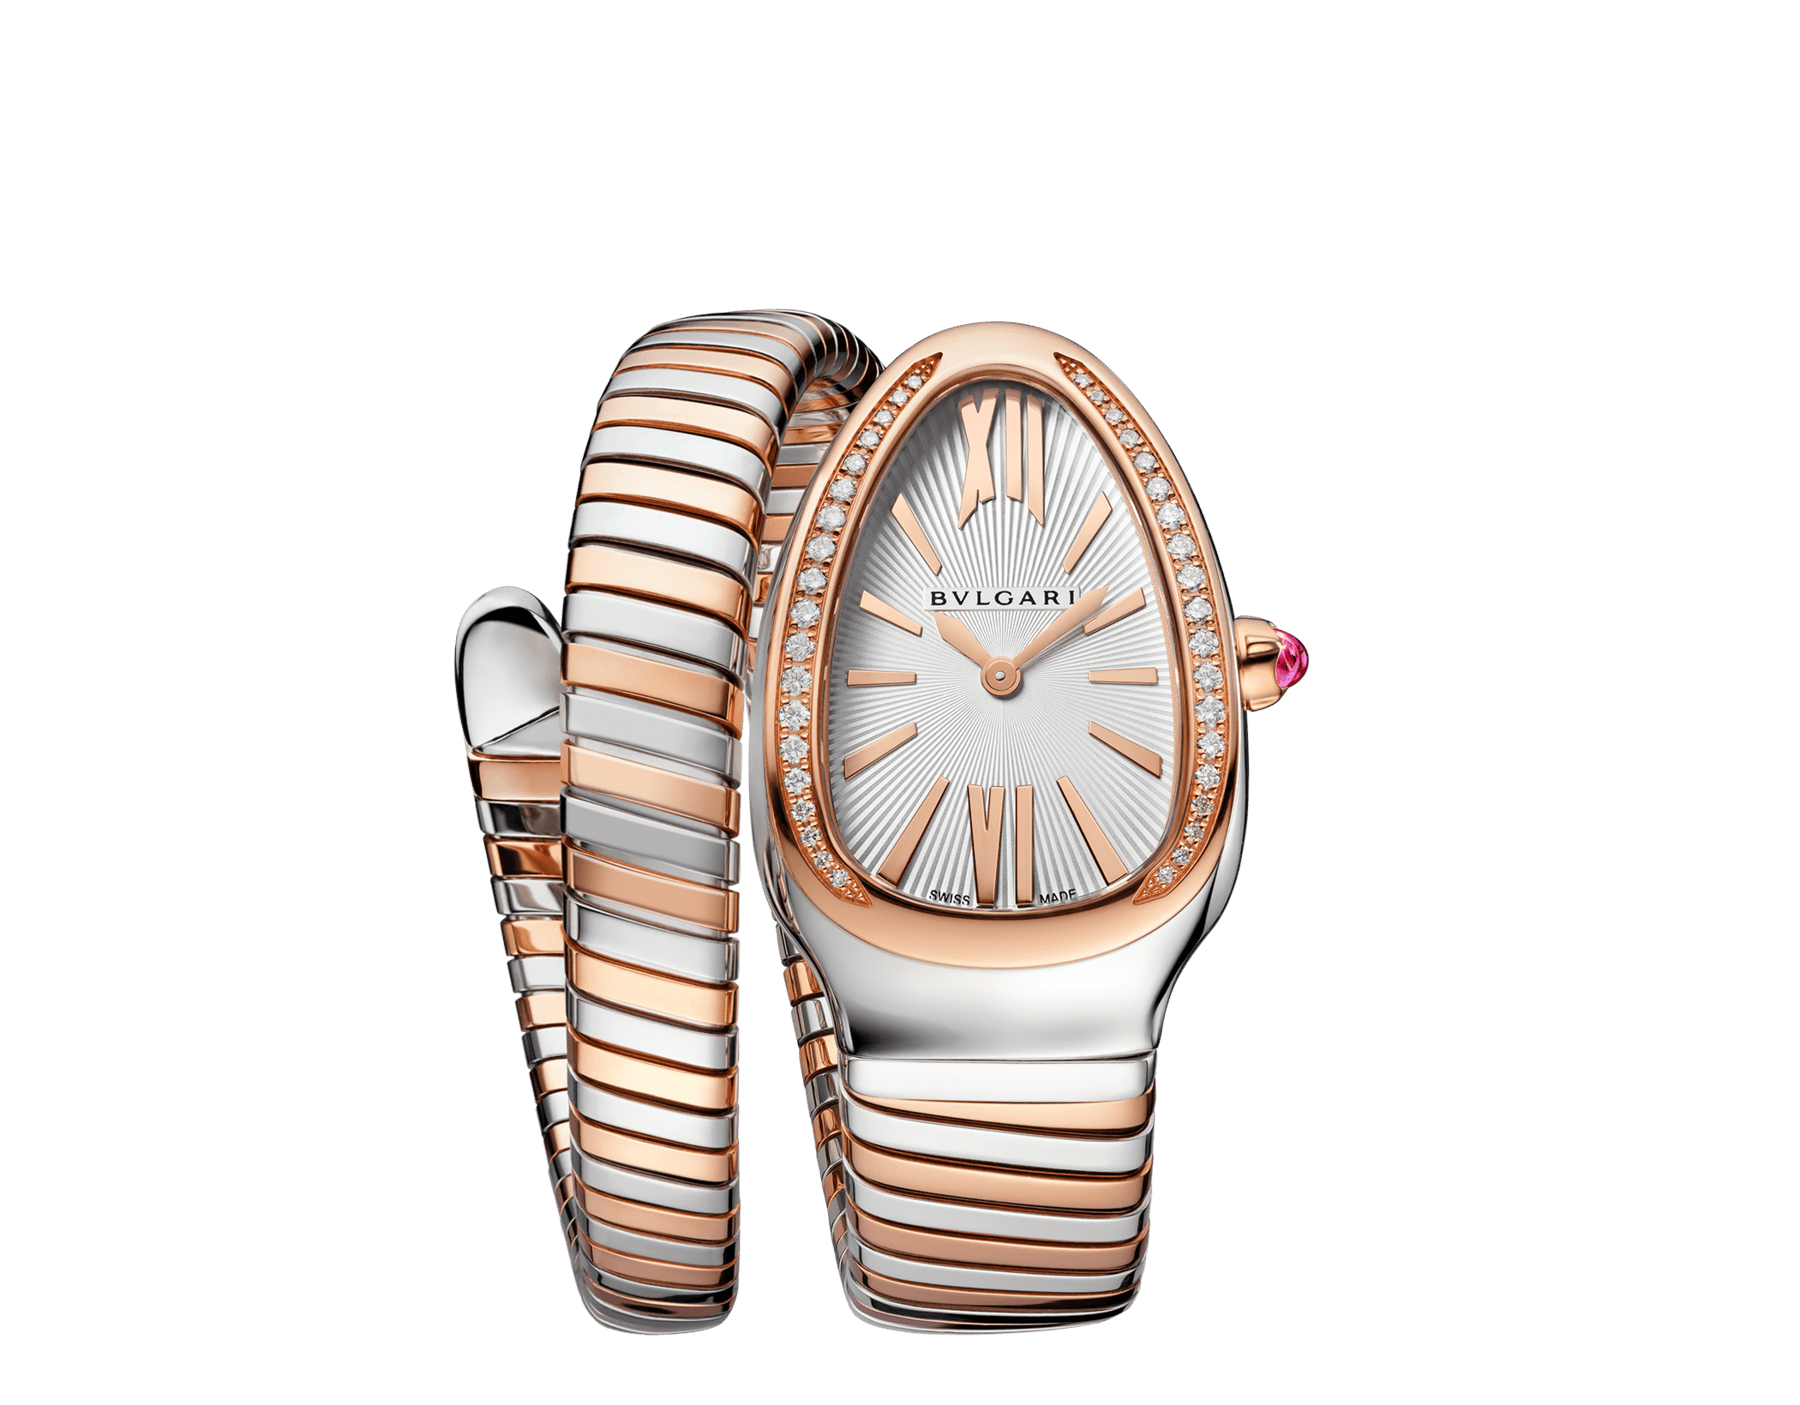 Serpenti Tubogas Lady watch, 35 mm stainless steel curved case, 18 kt rose gold bezel set with diamonds, 18 kt rose gold crown set with a cabochon cut pink rubellite, silver opaline dial with guilloché soleil treatment and hand-applied indexes, 18 kt rose gold and stainless steel single spiral bracelet. Quartz movement, hours and minutes functions. Water proof 30 m. SP35C6SPGD-1T-RG image 1